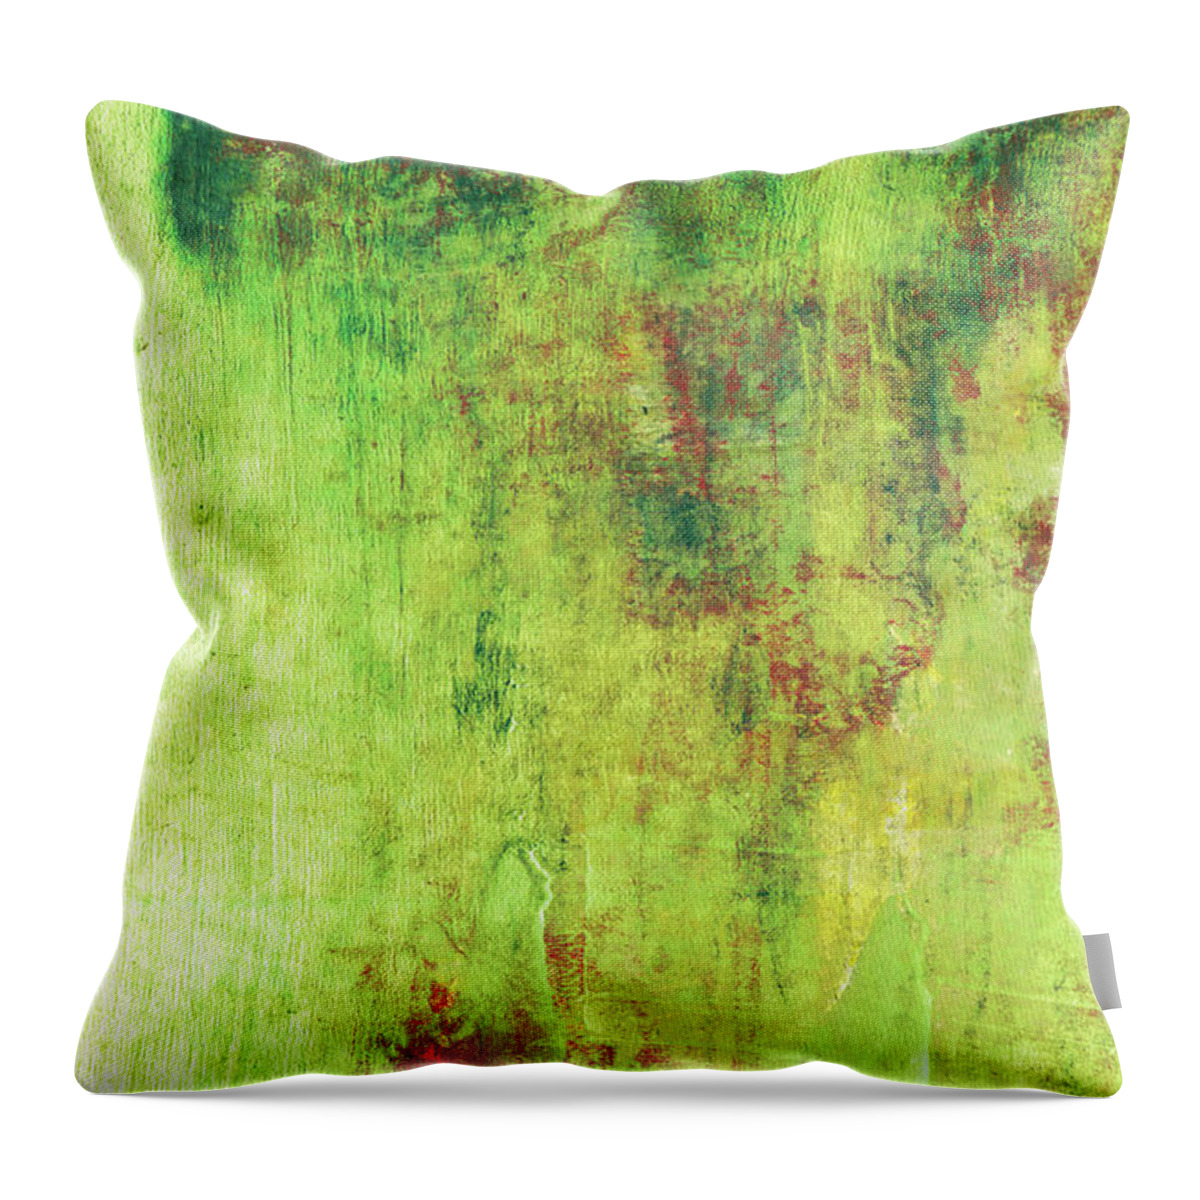 Abstract Throw Pillow featuring the painting Autumn Forest Mist - Pastel Abstract Landscape Art by Modern Abstract